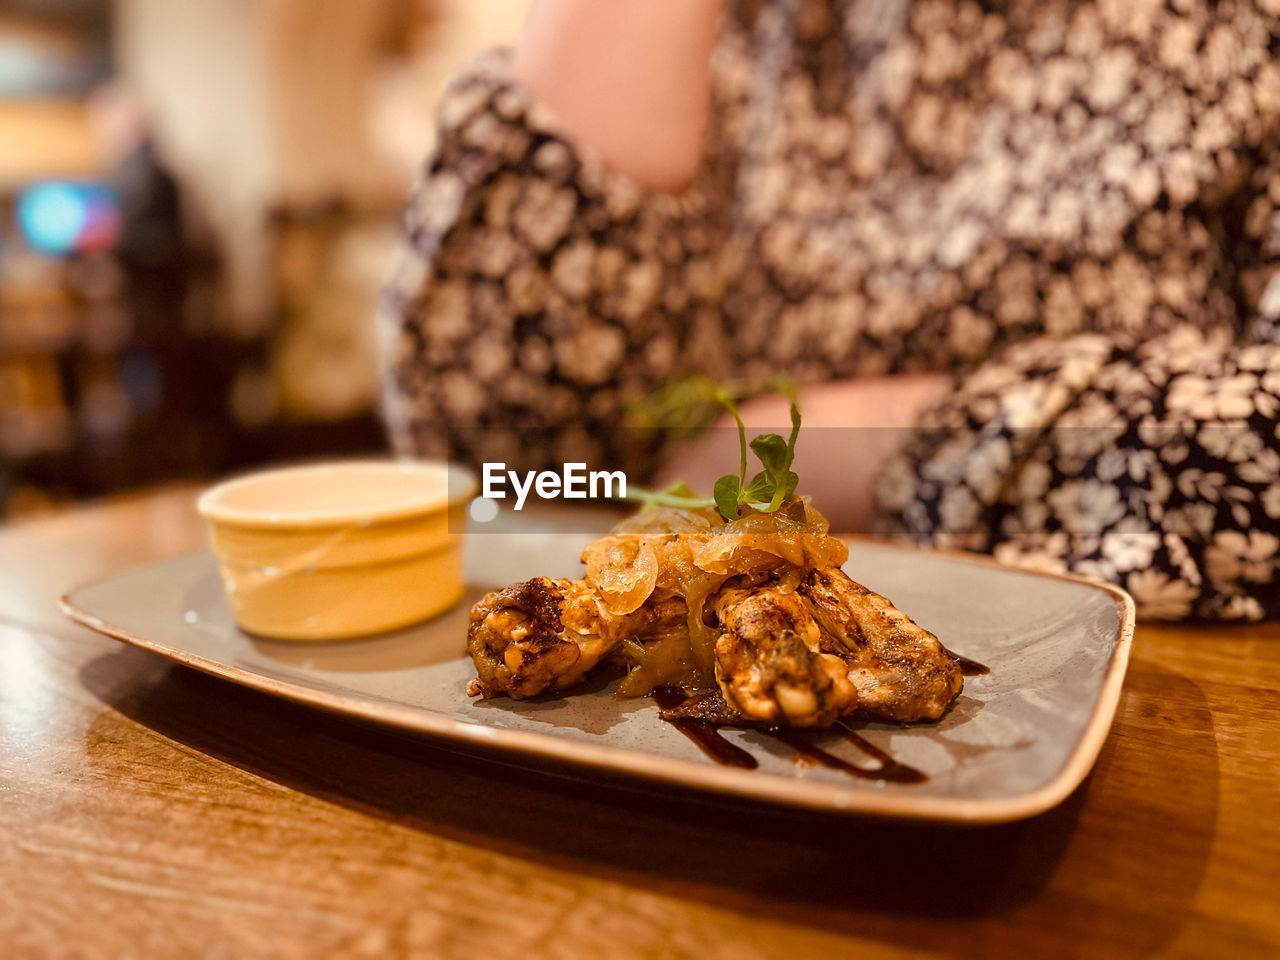 food and drink, food, meal, plate, table, dish, freshness, produce, indoors, breakfast, selective focus, close-up, focus on foreground, one person, healthy eating, wellbeing, restaurant, wood